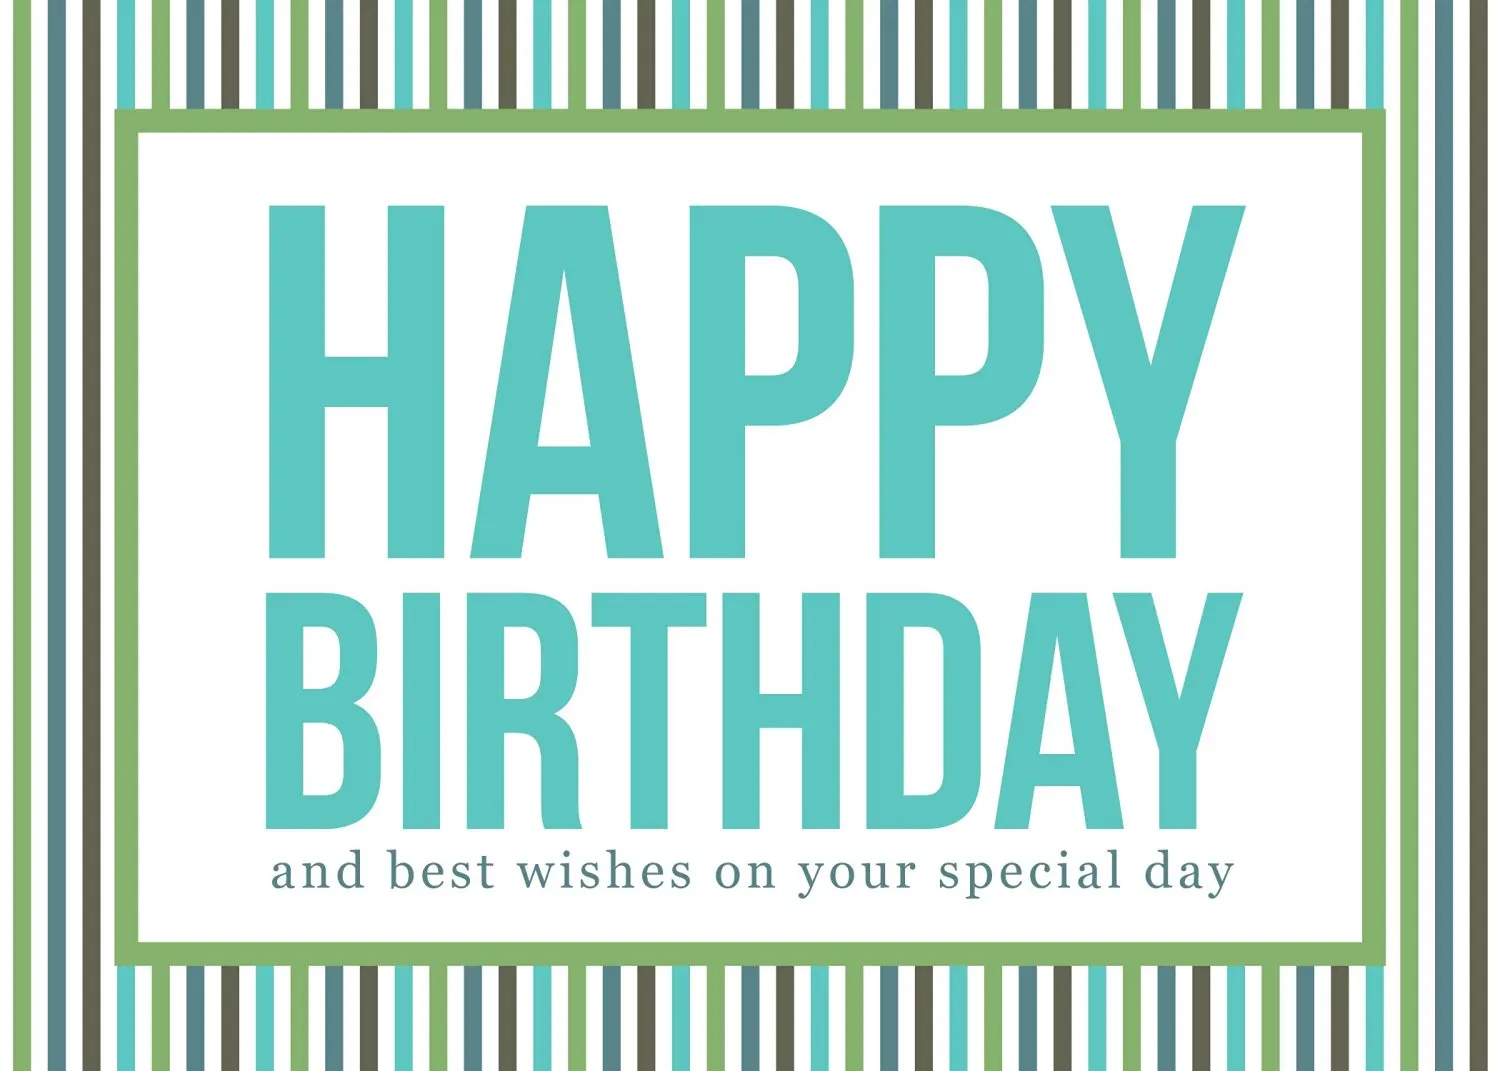 Buy Birthday Greeting Cards - B1604. Business Greeting Card Featuring a ...